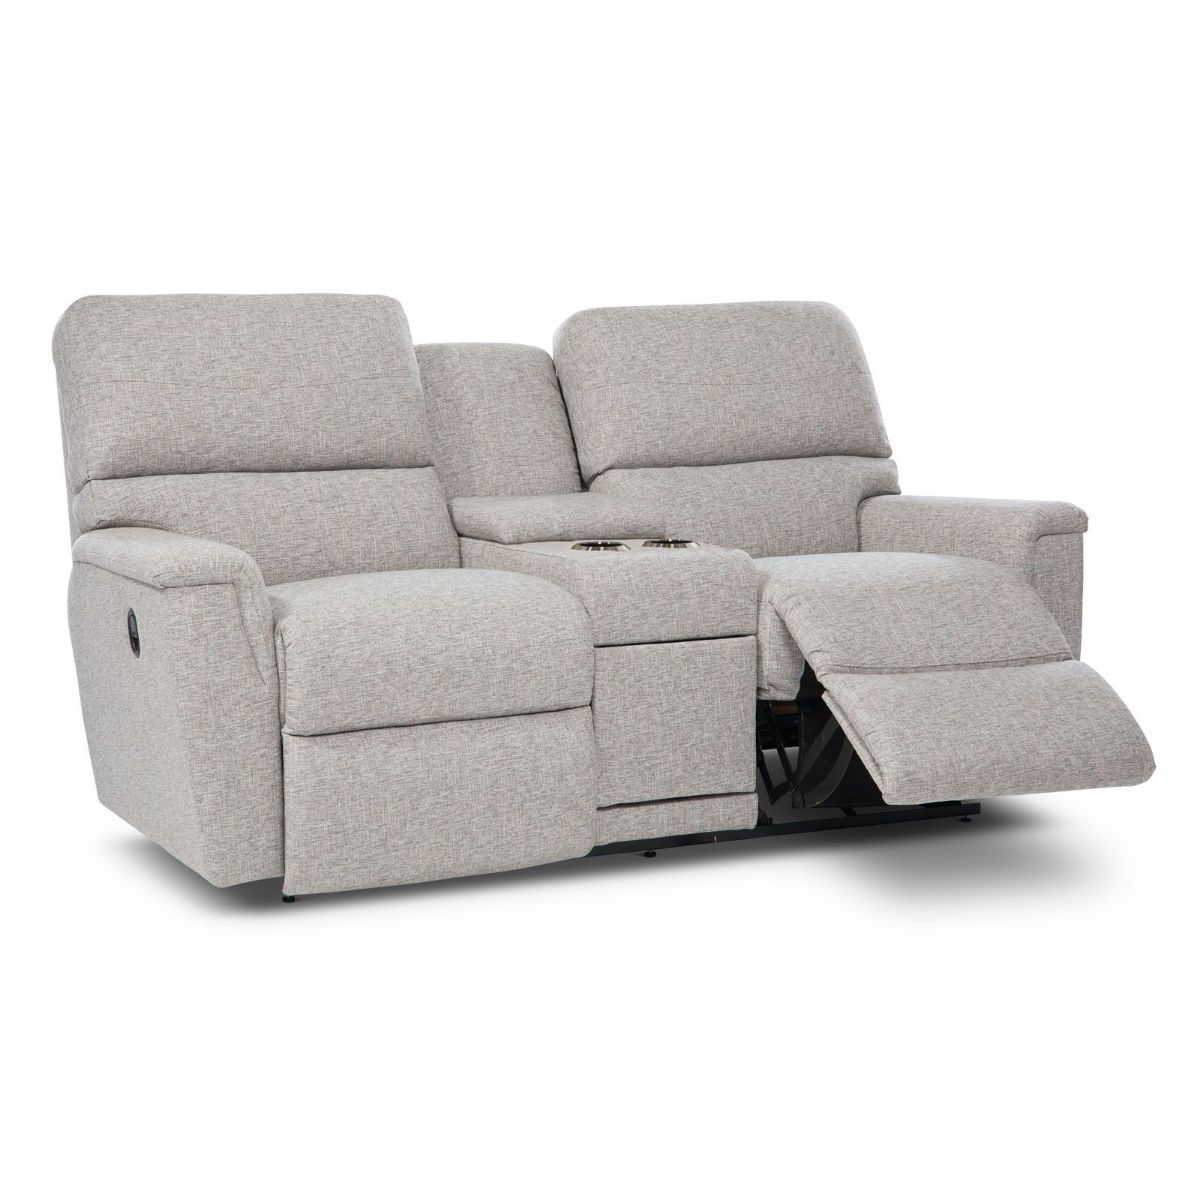 Picture of Ava Whisper Recliner Console Loveseat